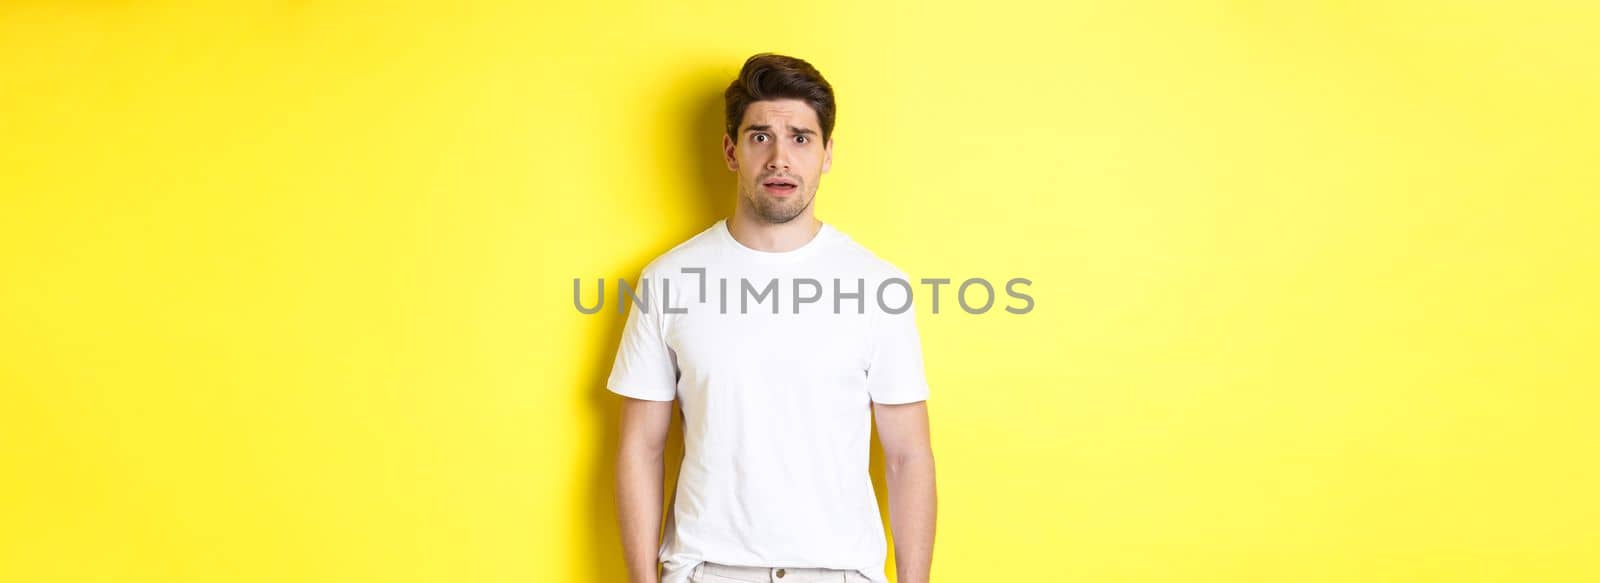 Image of confused and nervous man looking at something strange, frowning anxious, standing against yellow background.